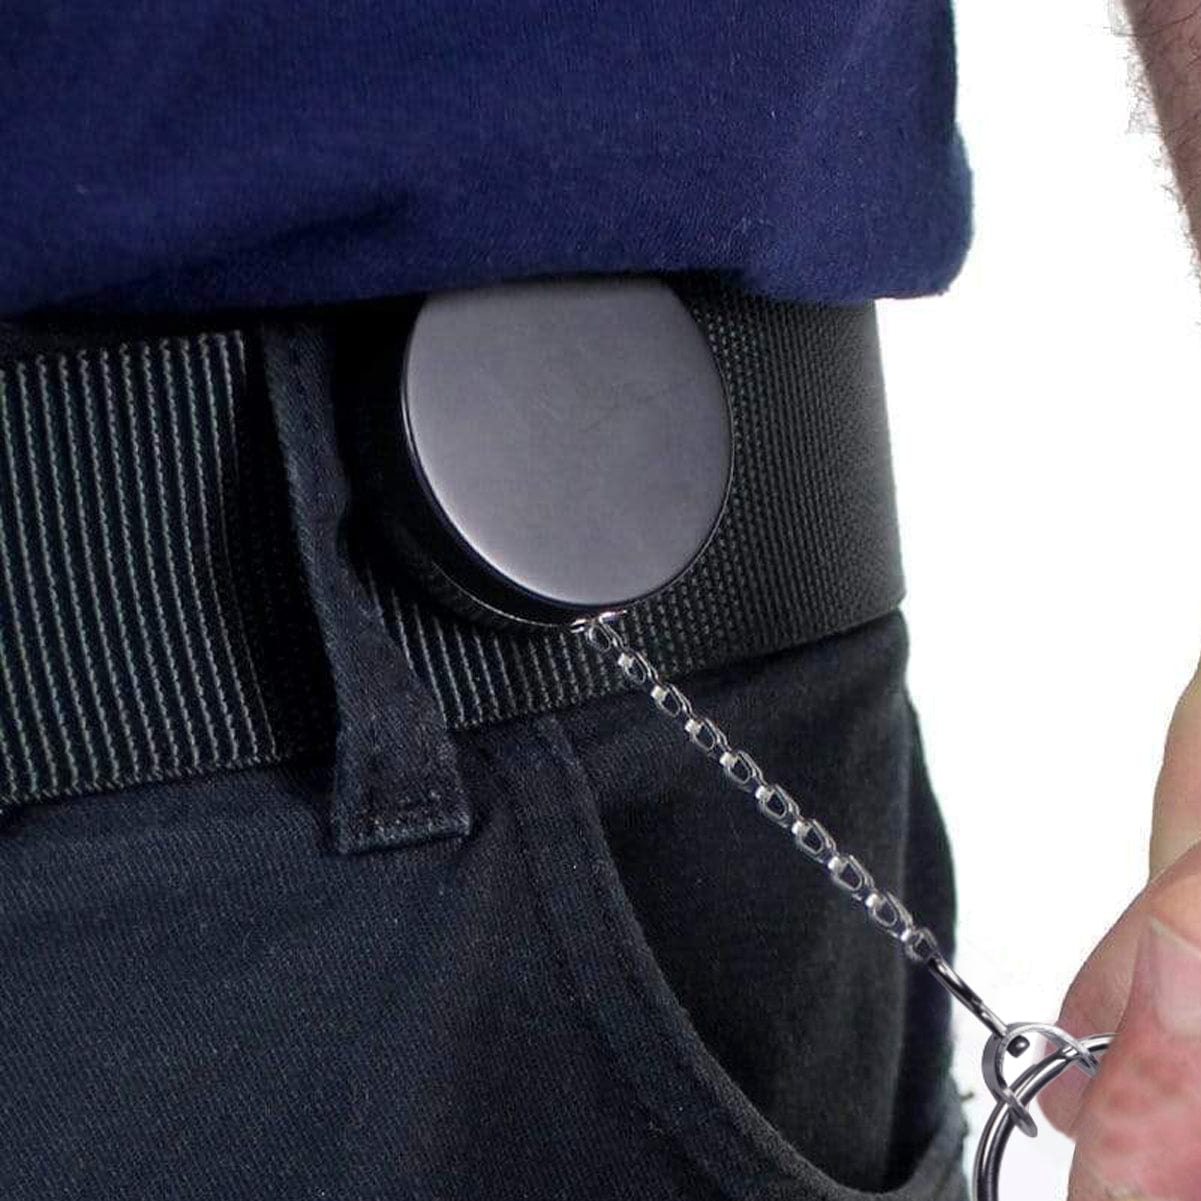 A person attaches a Heavy Duty Badge Reel with Chain & Belt Clip - Strong All Metal Retractable Keychain for Keys and Badges (2120-3325) to their belt loop, making use of its retractable keychain function.